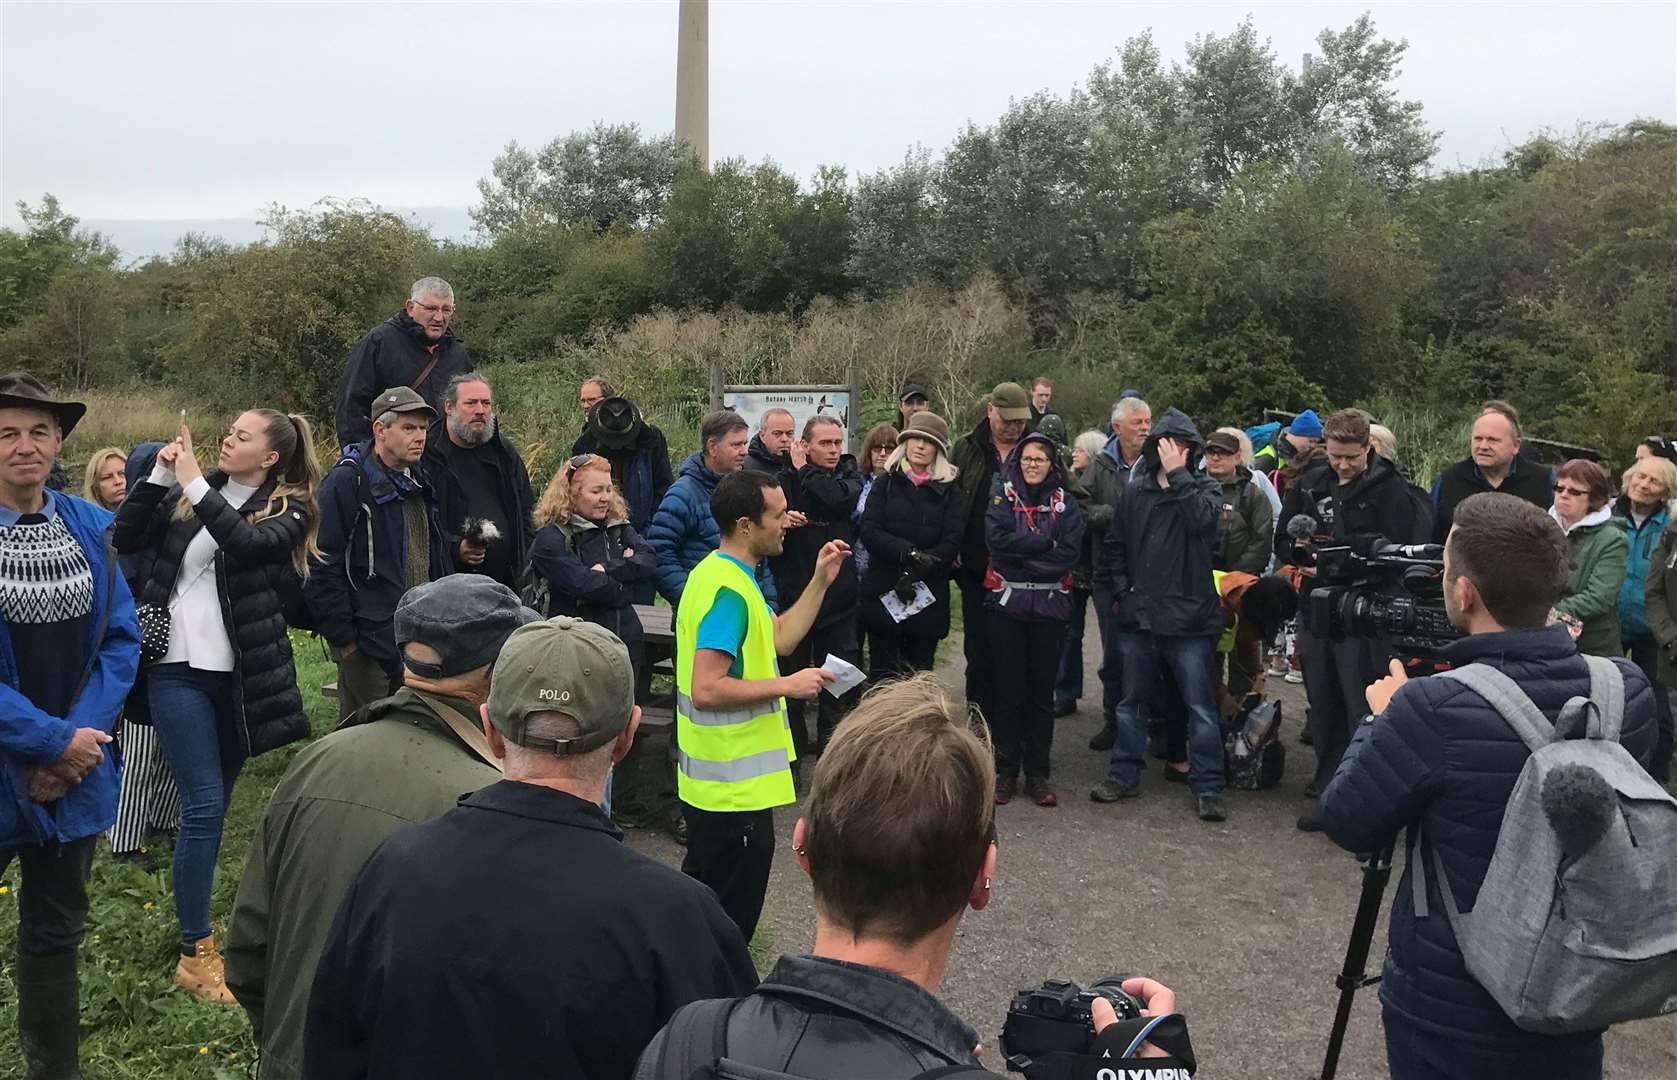 Jamie Robins from Buglife speaking to the crowd at the Swanscombe theme park protest. Picture: Chris Hunter